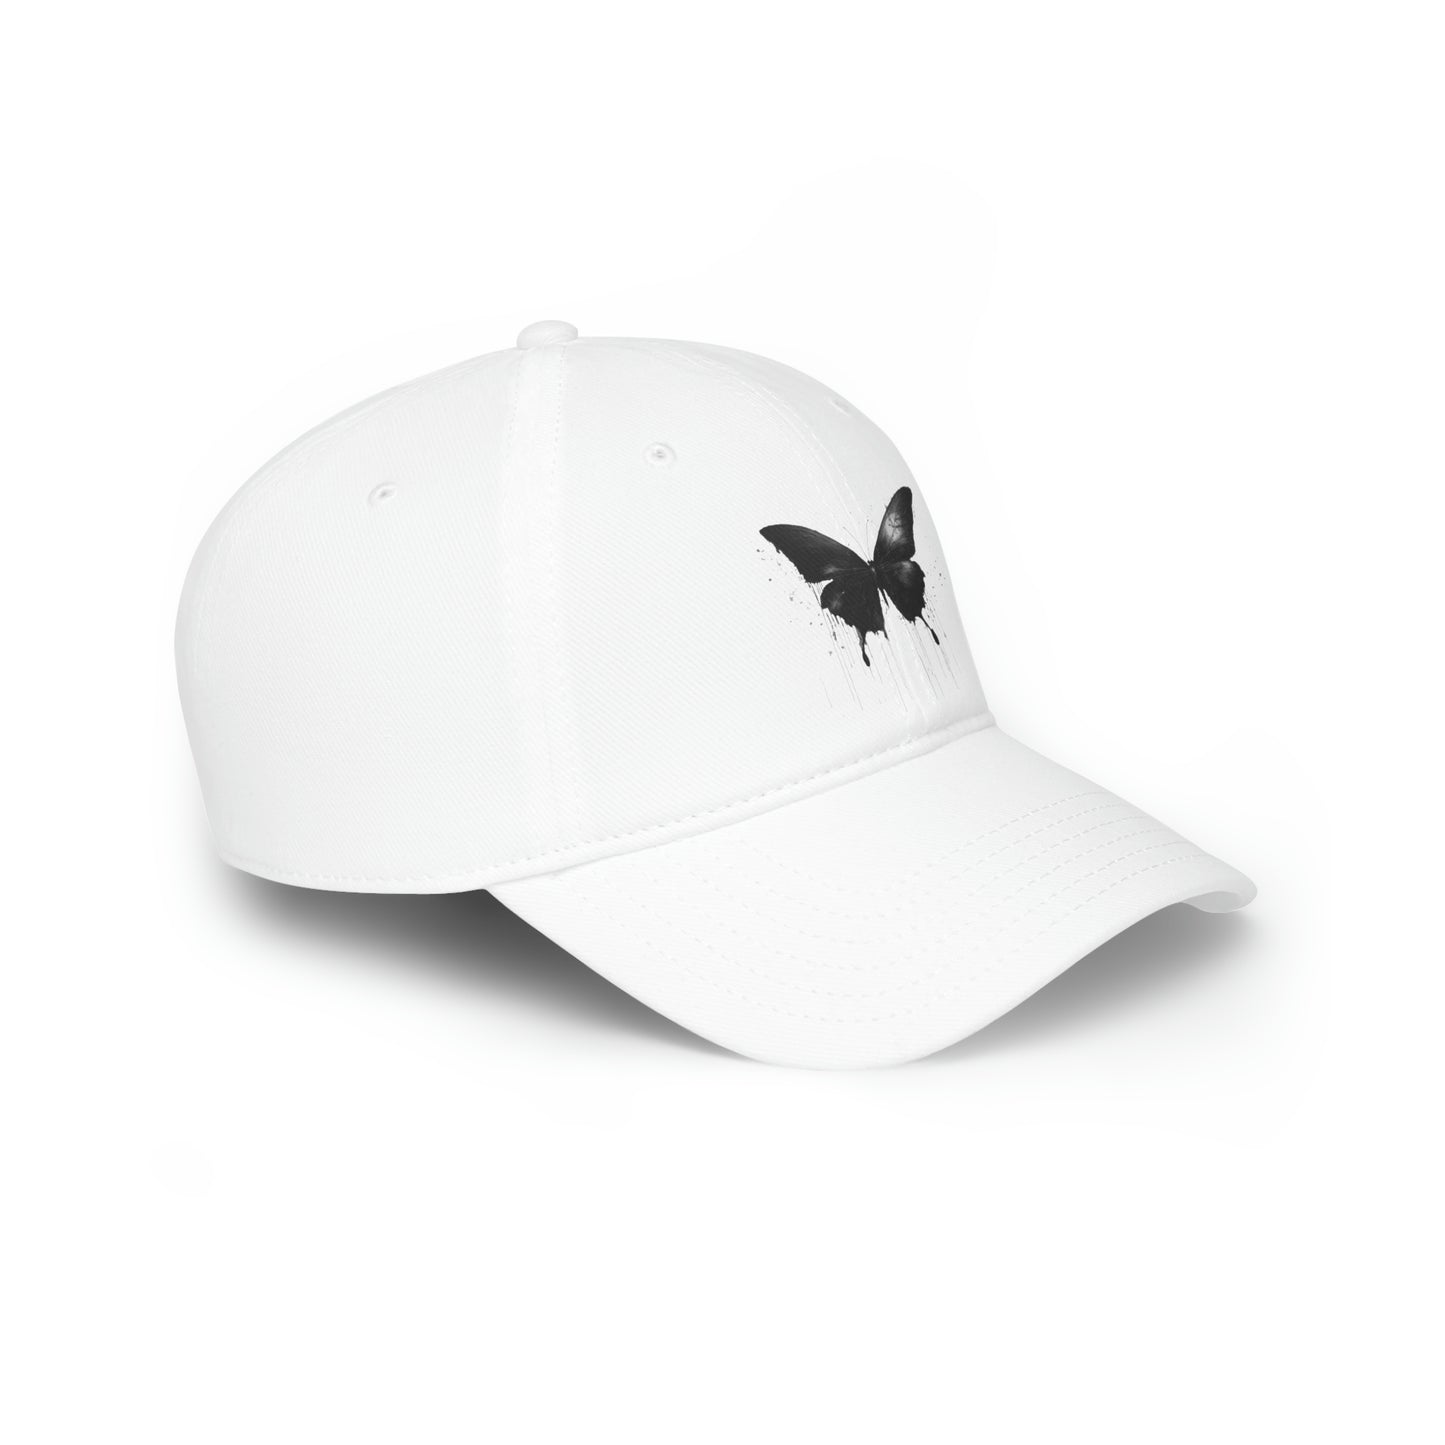 Black Butterfly Low Profile Baseball Cap, Dripping hat lid fit Artistic AI Made Cool Artsy Design Dark Style Edgy